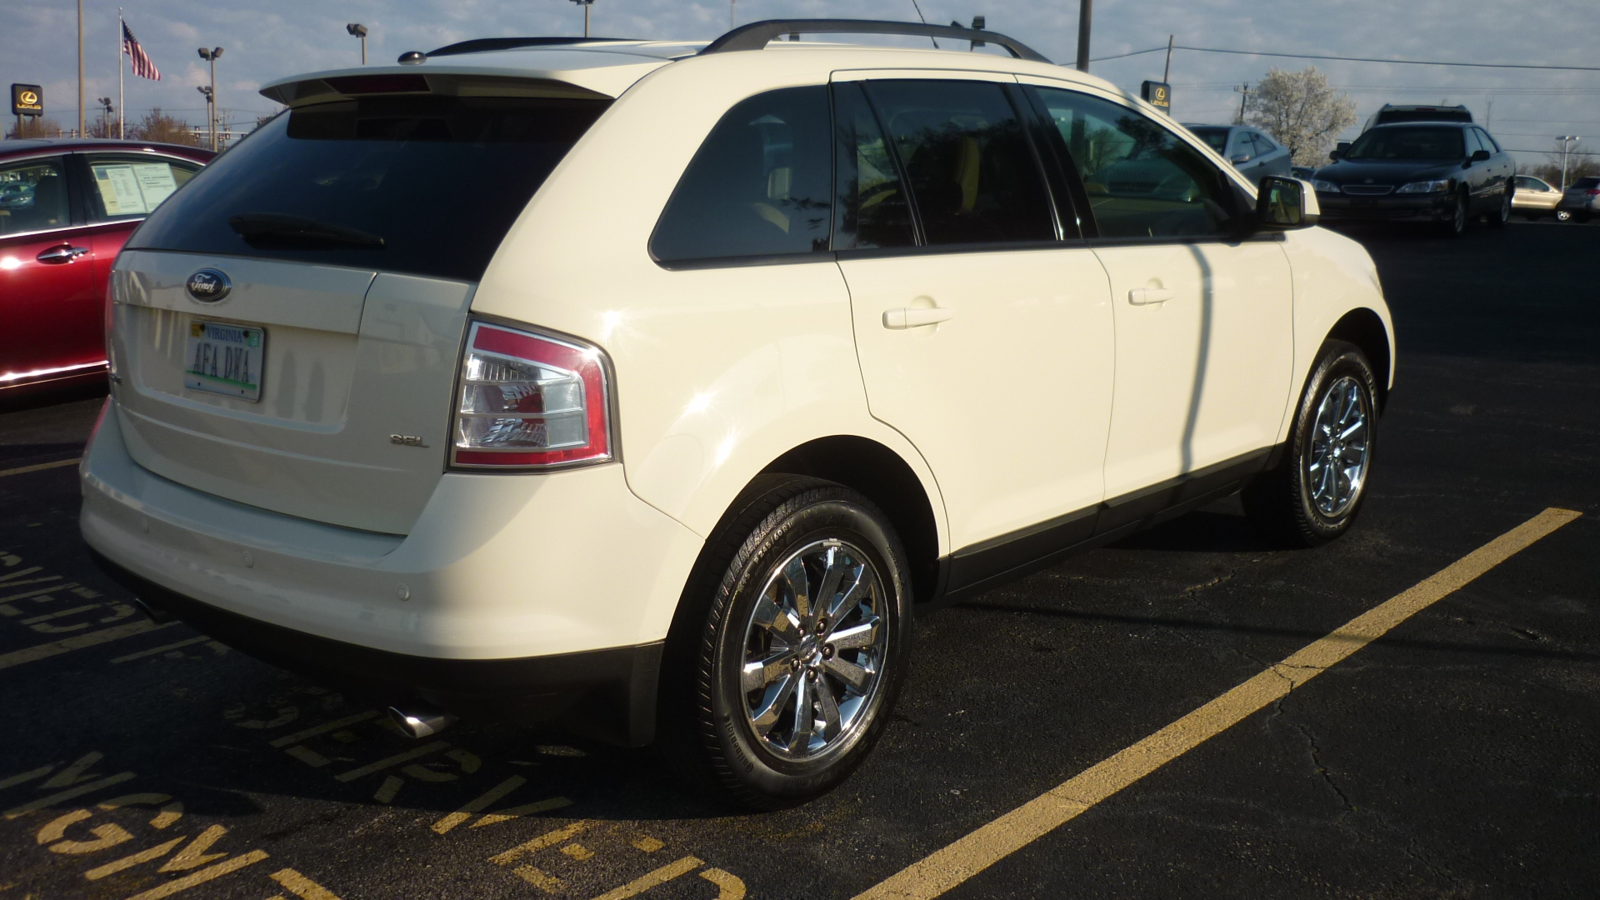 Ford financing rate 2007 edge #2